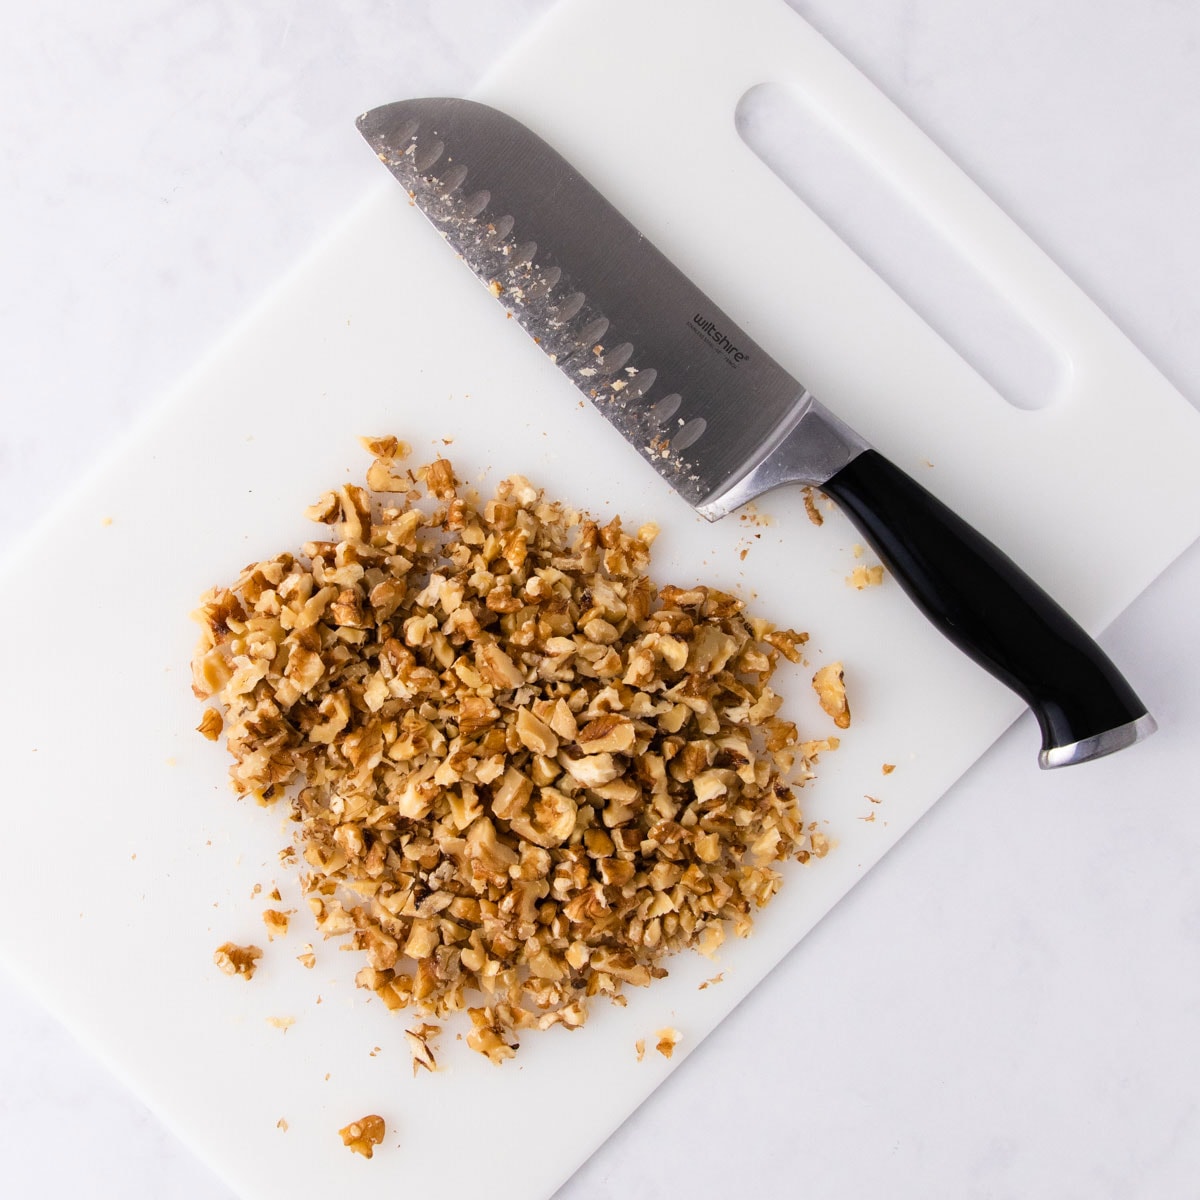 Chopped walnuts on a white chopping board, next to a large chef's knife with a black handle.